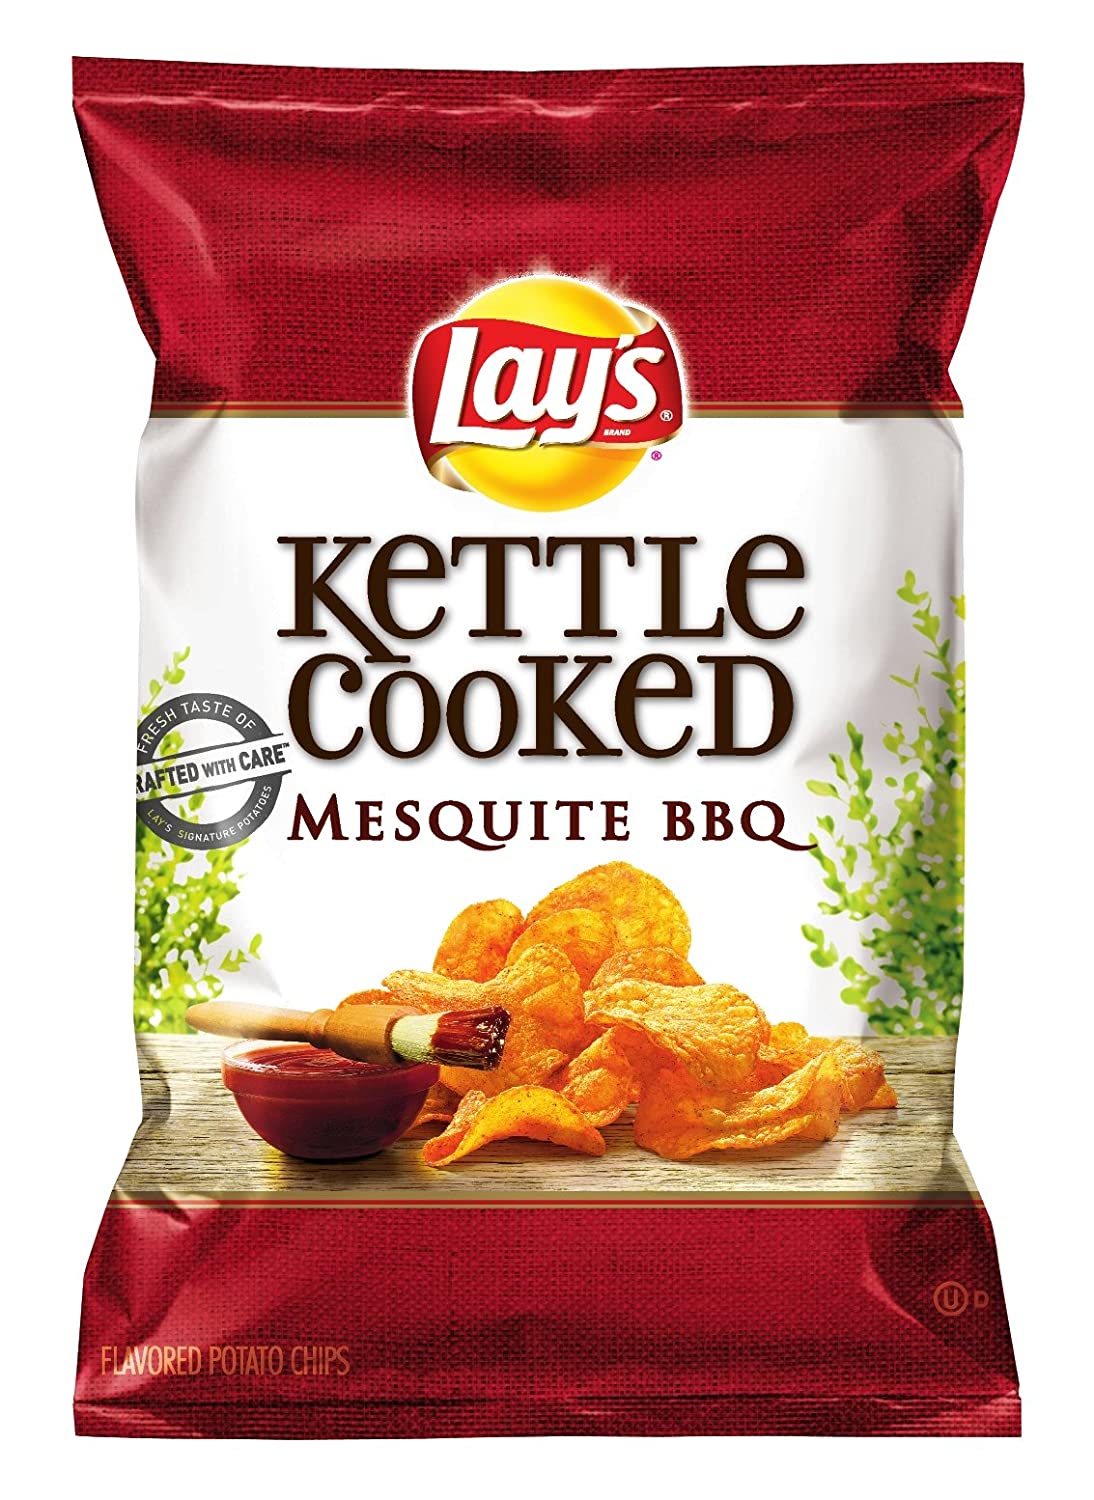 Lays Kettle Cooked Mesquite BBQ 184g